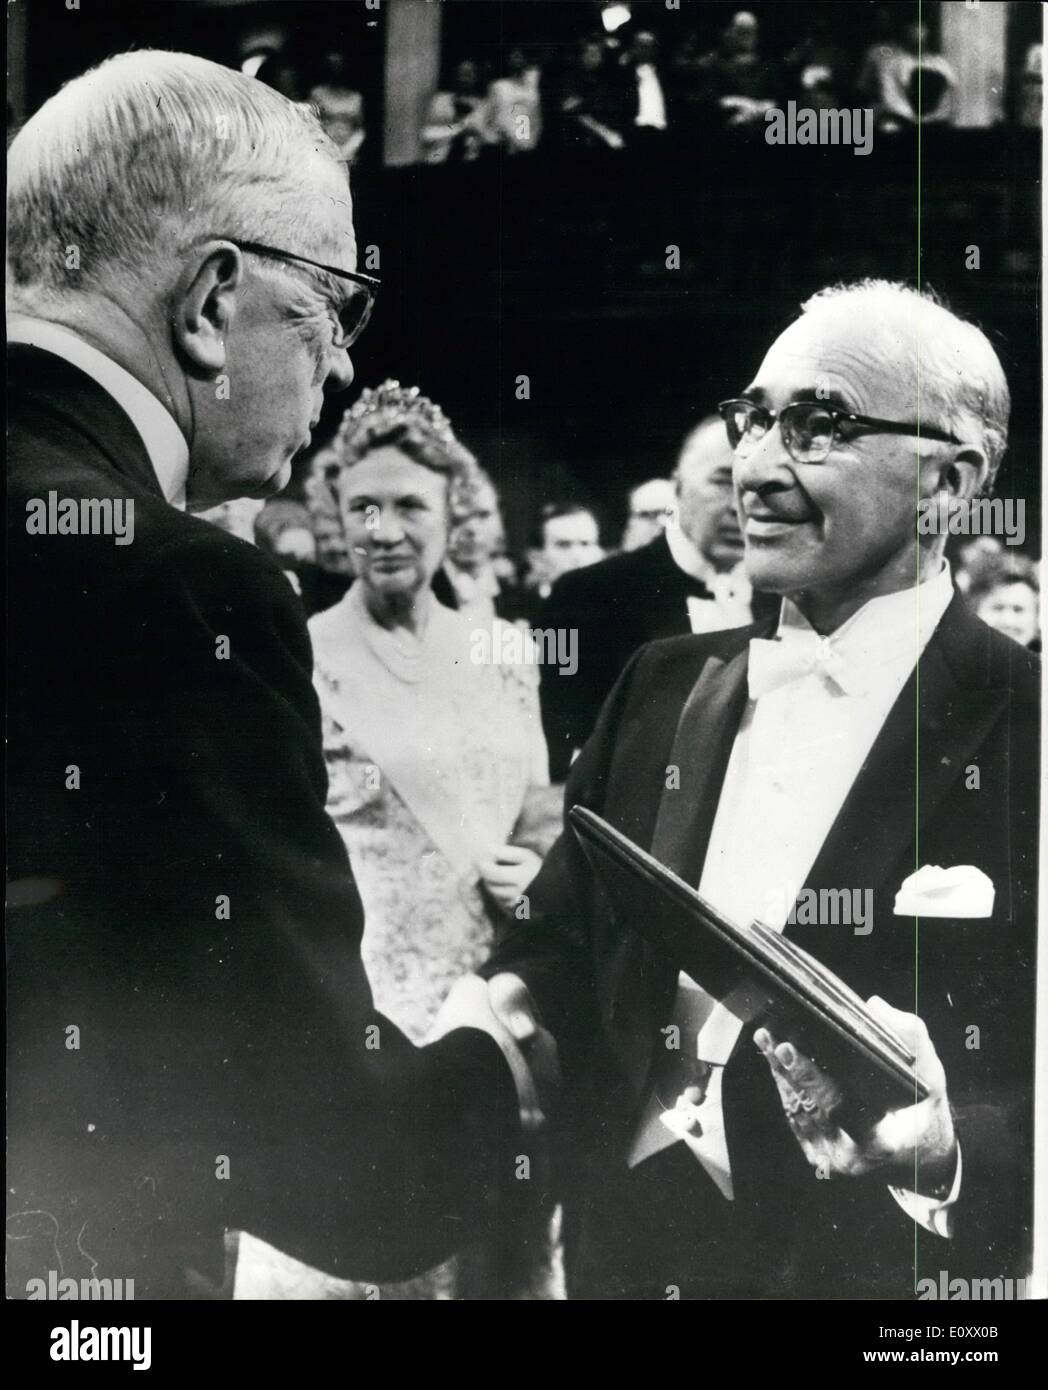 Dec. 12, 1967 - Nobel Prize Awards In Stockholm: At a ceremony in the Concert Hall, Stockholm on Sunday (Dec 10), King Gustav Adolf of Sweden presented this year's Nobel Prizes. The ceremony was held on the 71st. anniversary of the death of Alfred Nobel, the inventor and industrialist. Photo Shows: Prof. George Wald (U.S.A.), joint winner of the prize for medicine, receiving the prize form King Gustav Adolf of Sweden. Stock Photo